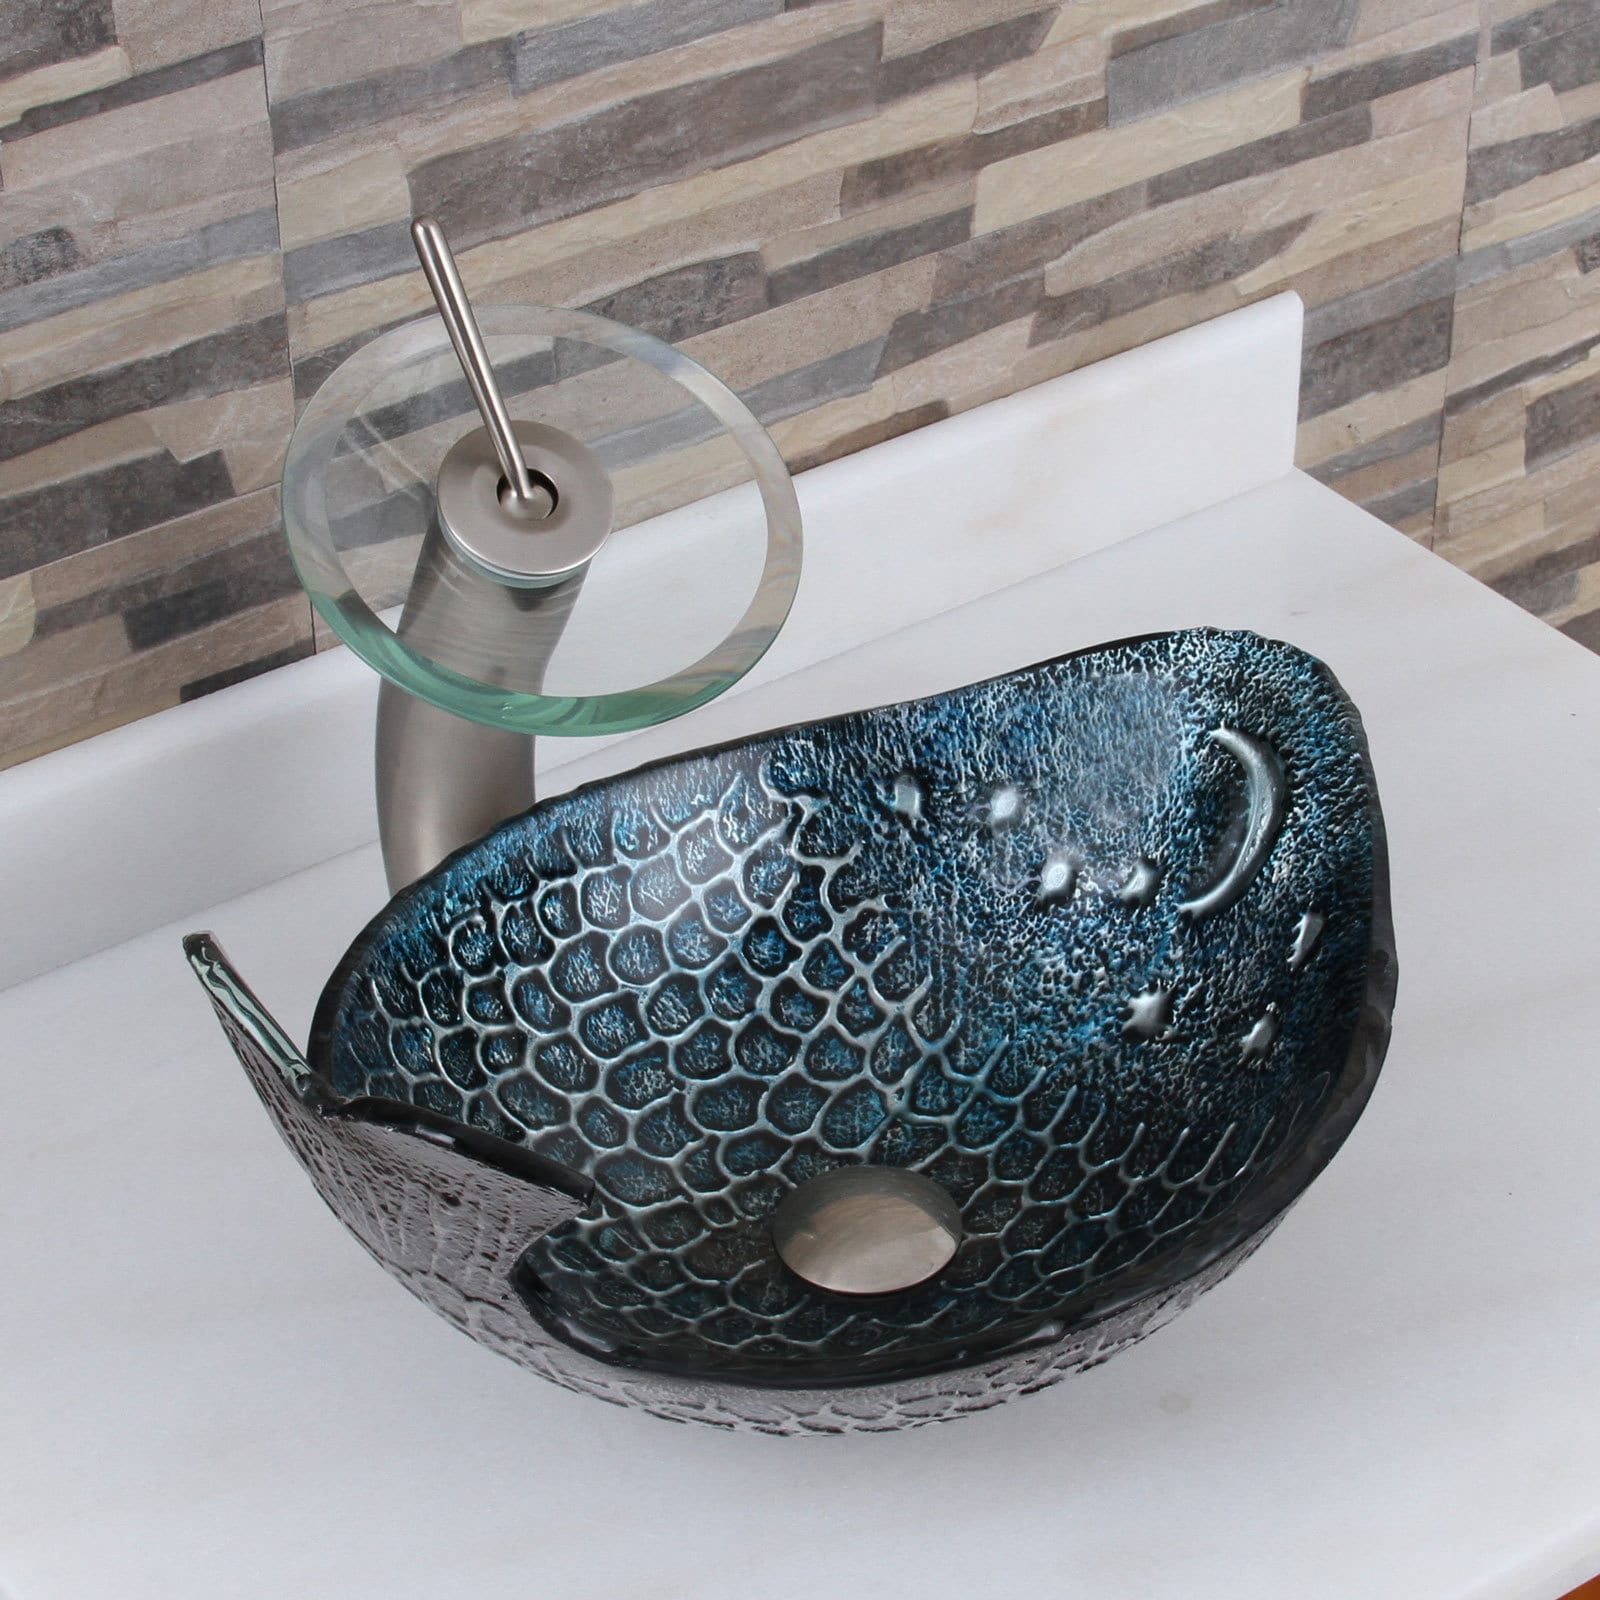 Elite Pacific Whale F22t Pattern Tempered Glass Bathroom Vessel